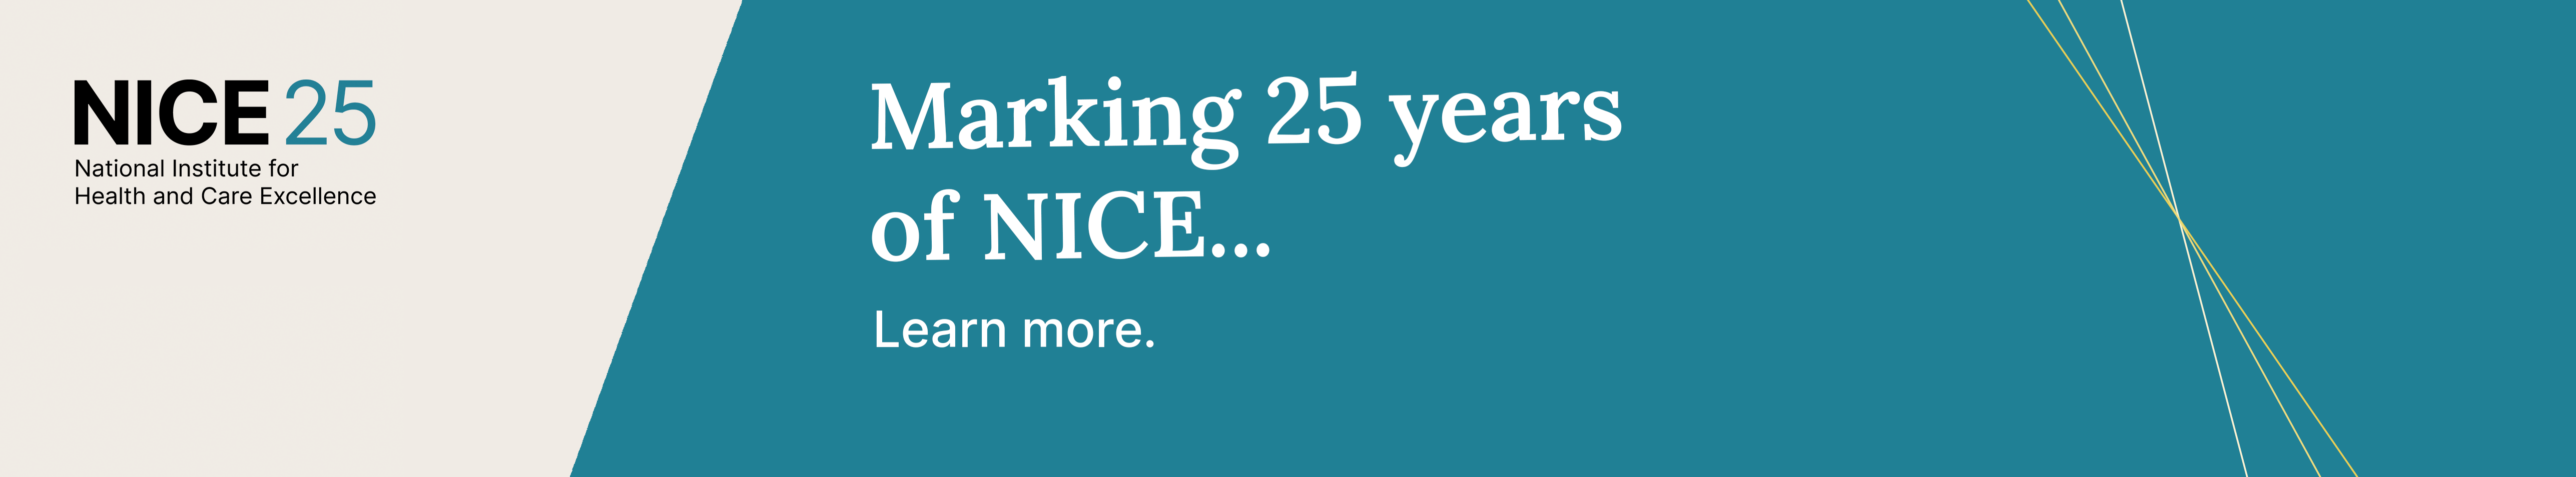 Learn more about how we're marking 25 years of NICE